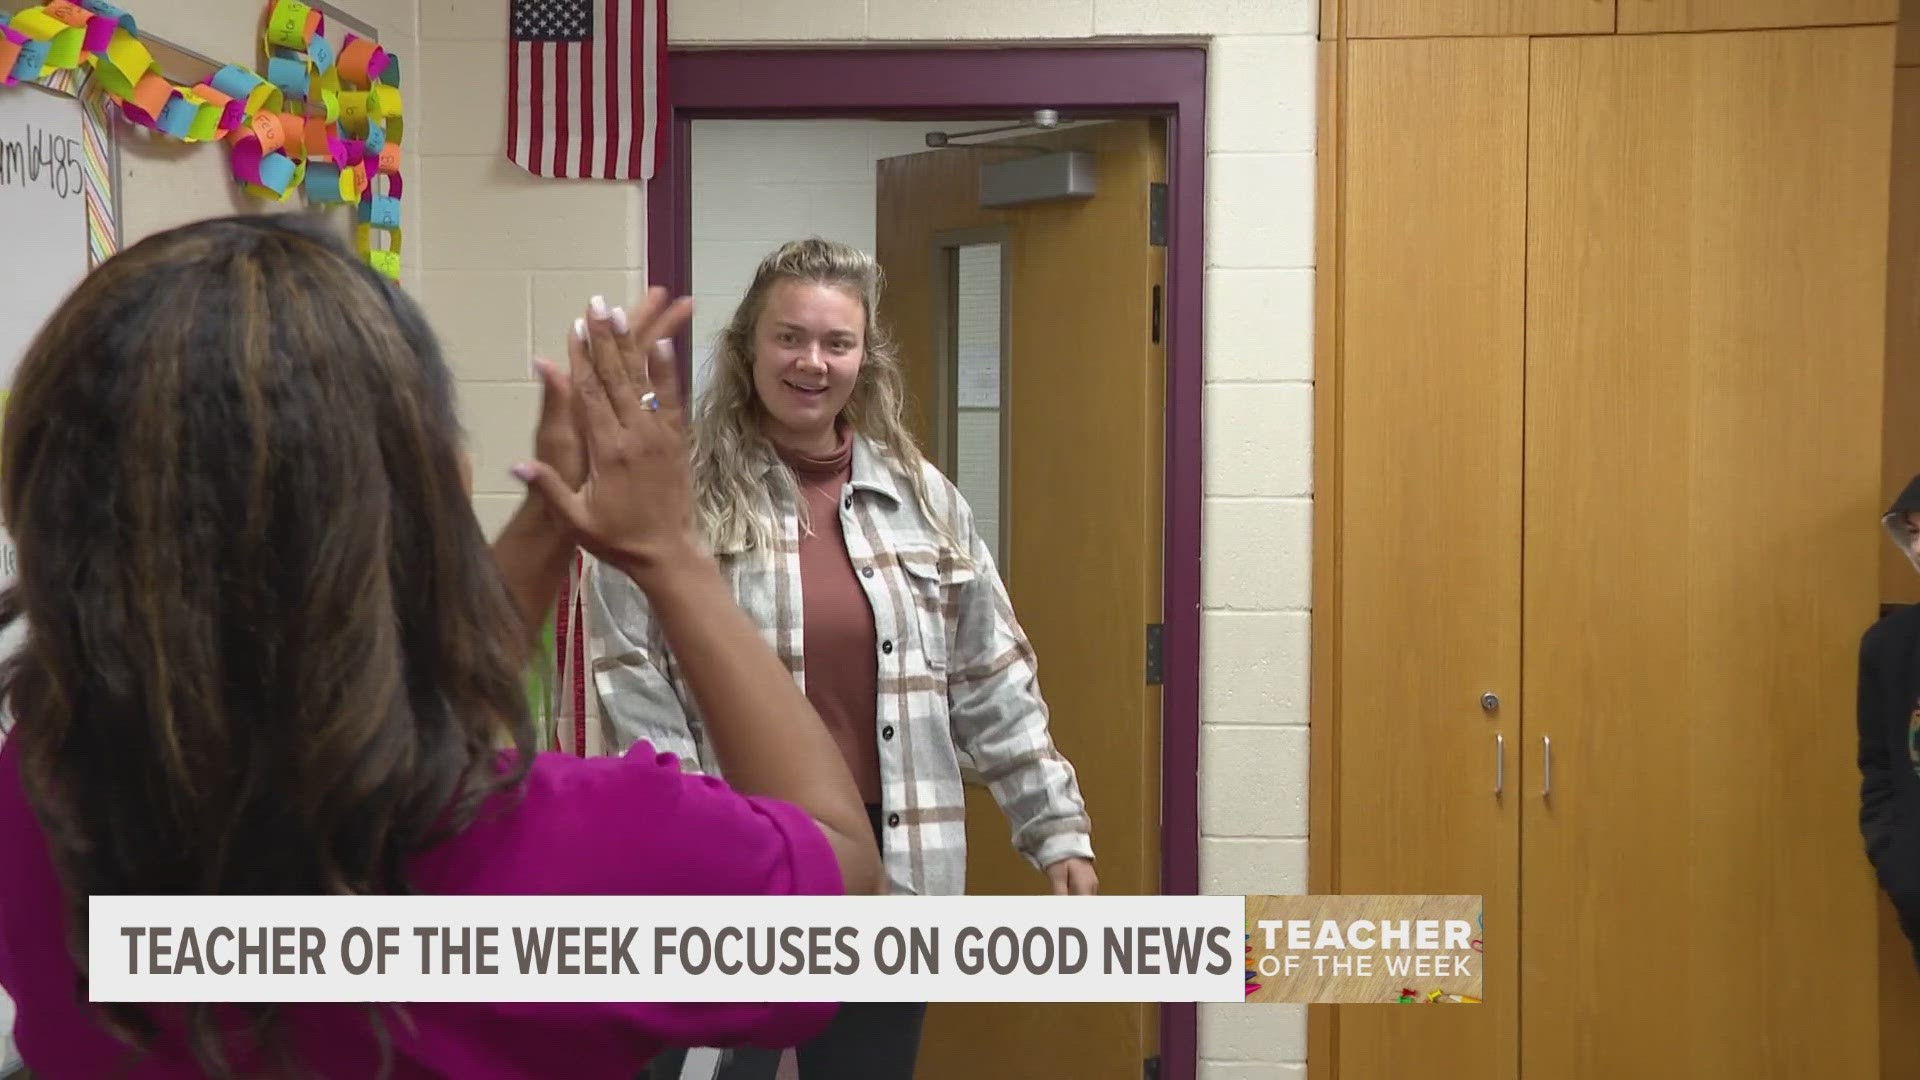 We surprised another unsuspecting educator for our next Teacher of the Week. This time, 13 ON YOUR SIDE stopped by Belding Middle School to surprise Brie Foy.